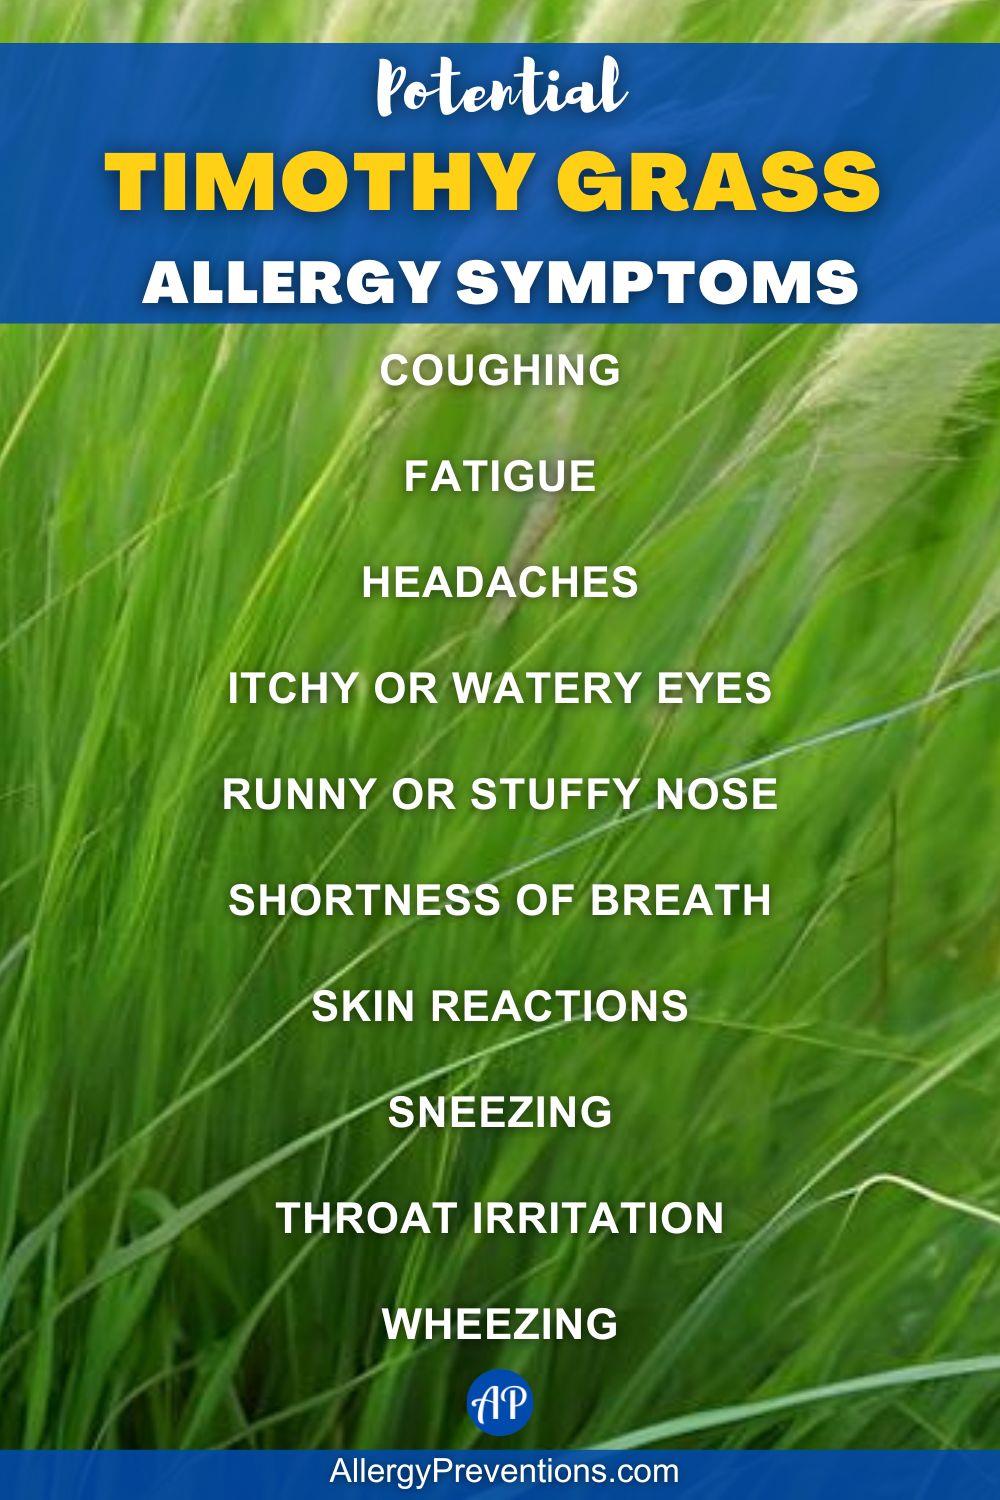 Timothy grass allergy symptoms infographic. Some potential allergy symptoms may include: Coughing, fatigue, headaches, Itchy or Watery Eyes, Runny or Stuffy Nose, shortness of breath, skin reactions, Sneezing, throat irritation, and Wheezing.